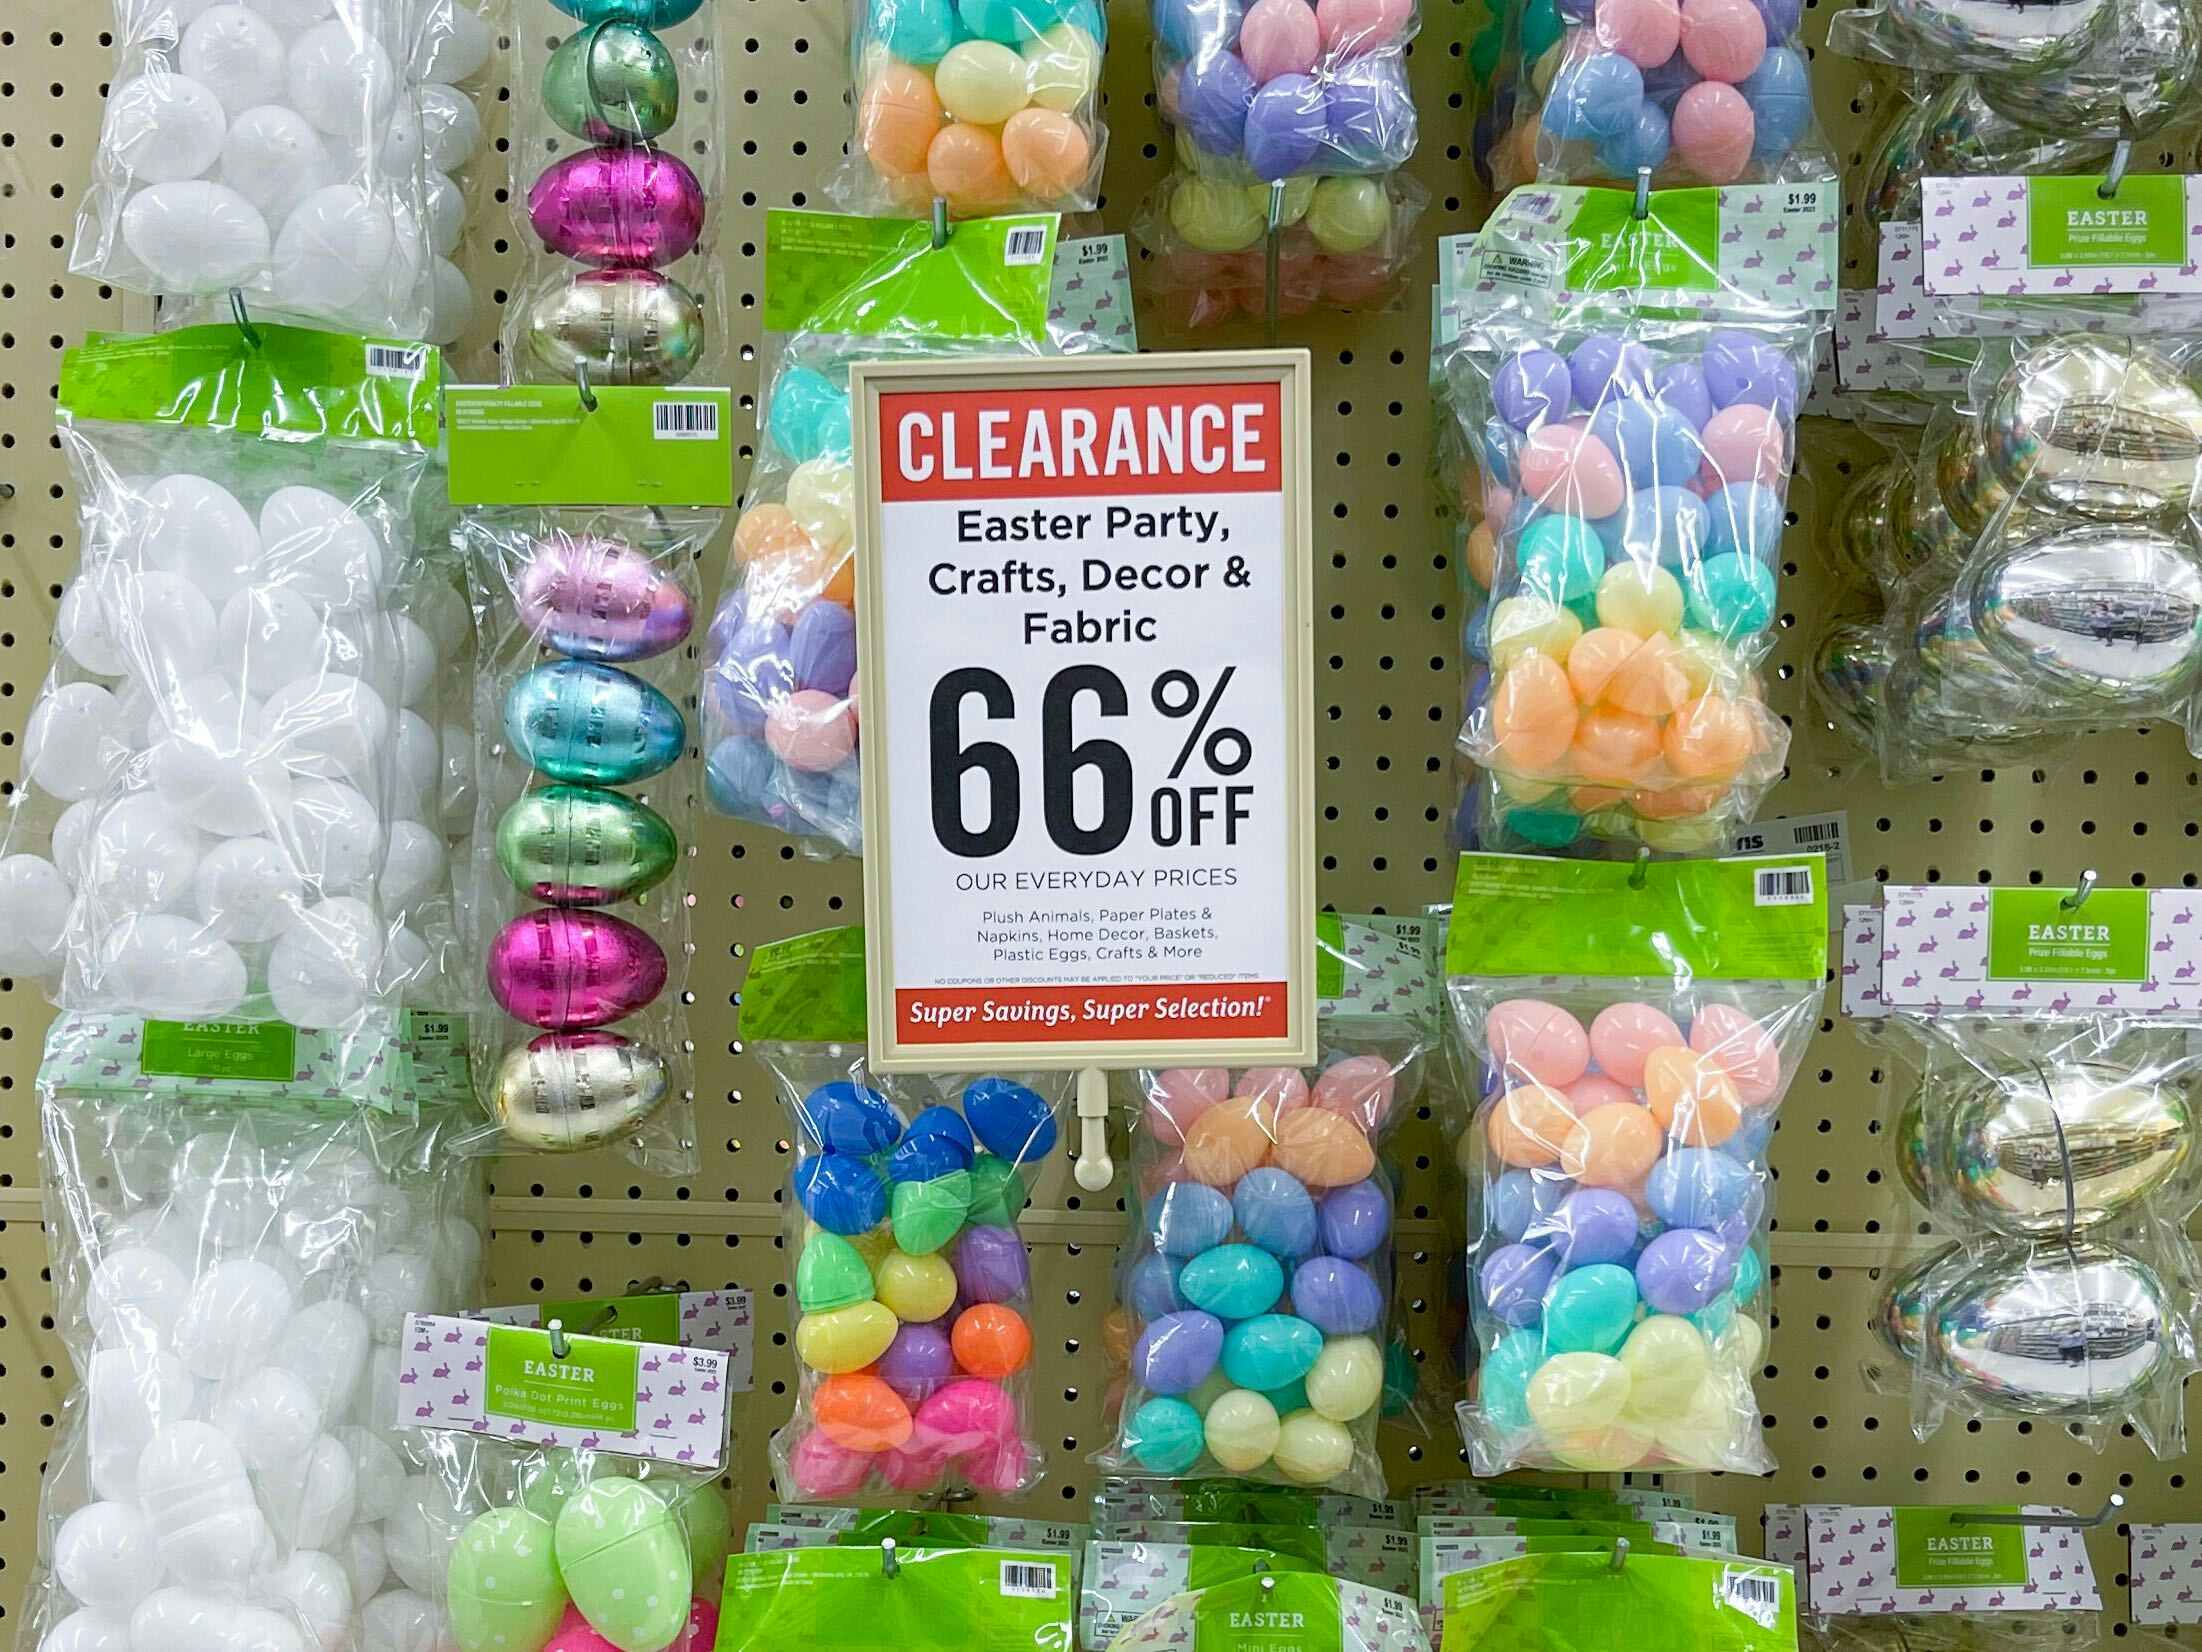 Colorful packaged Easter Eggs on sale at Hobby Lobby